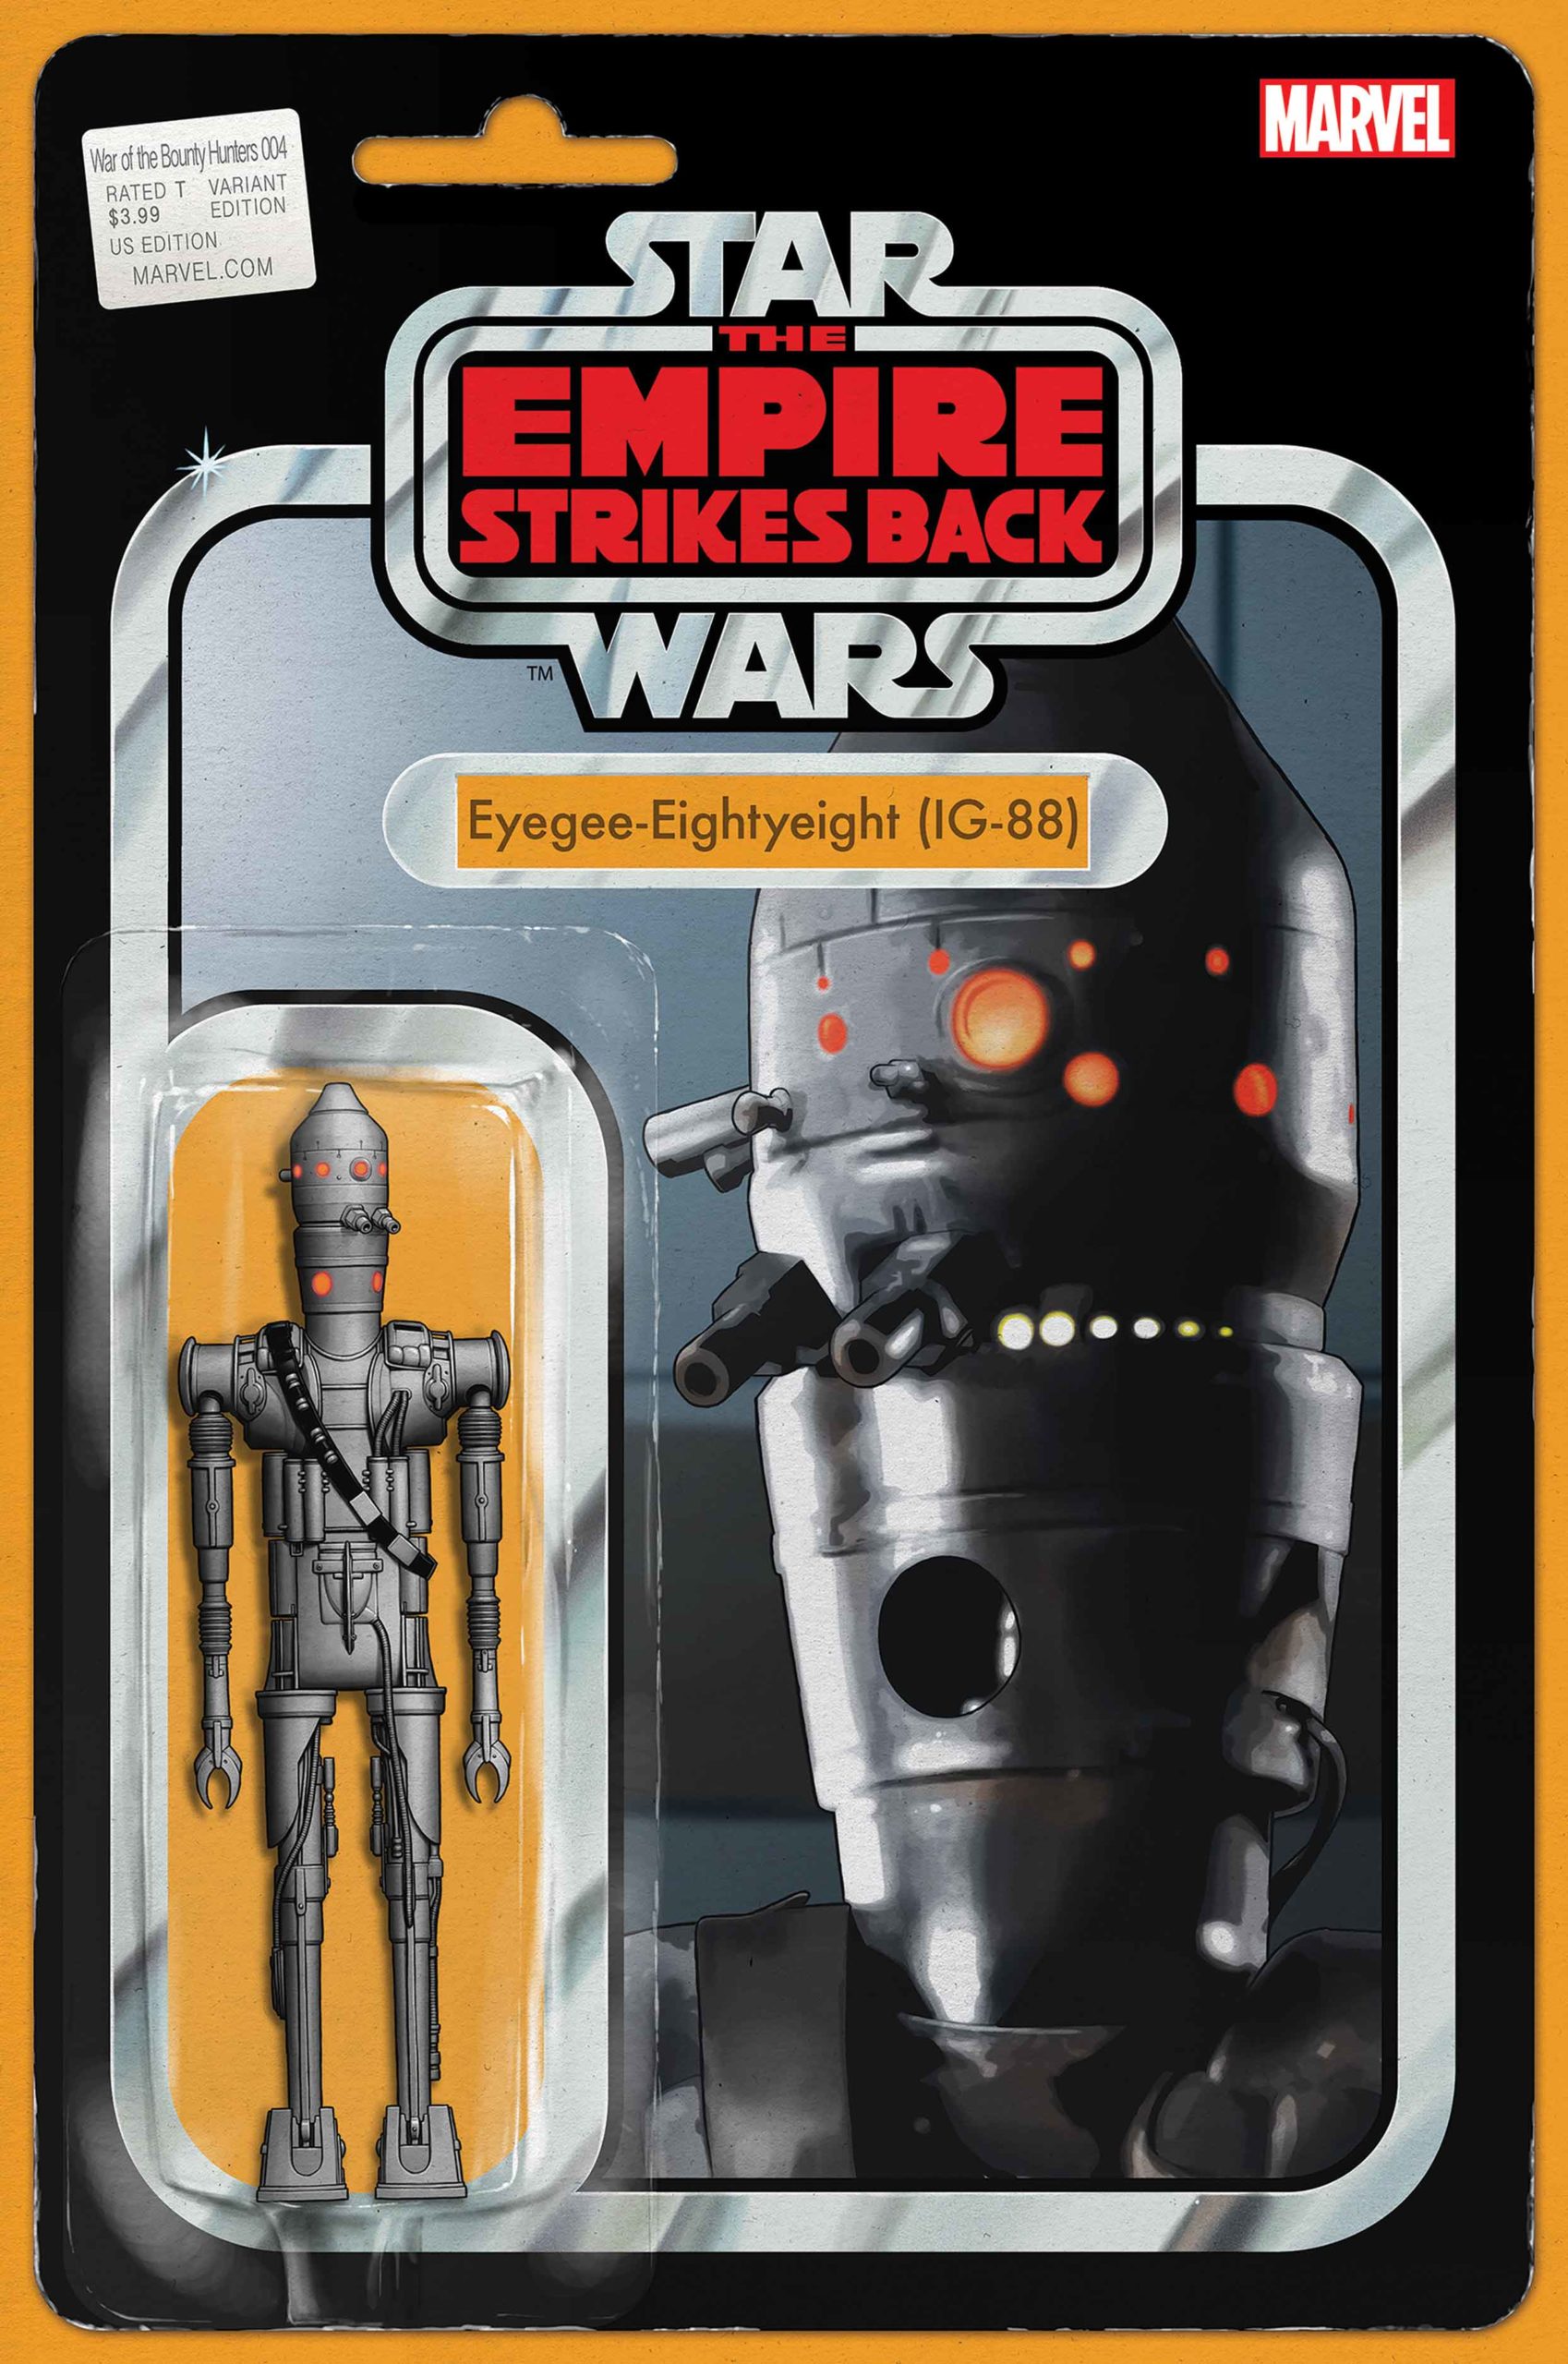 War of the Bounty Hunters #4 ("IG-88" Action Figure Variant Cover) (08.09.2021)